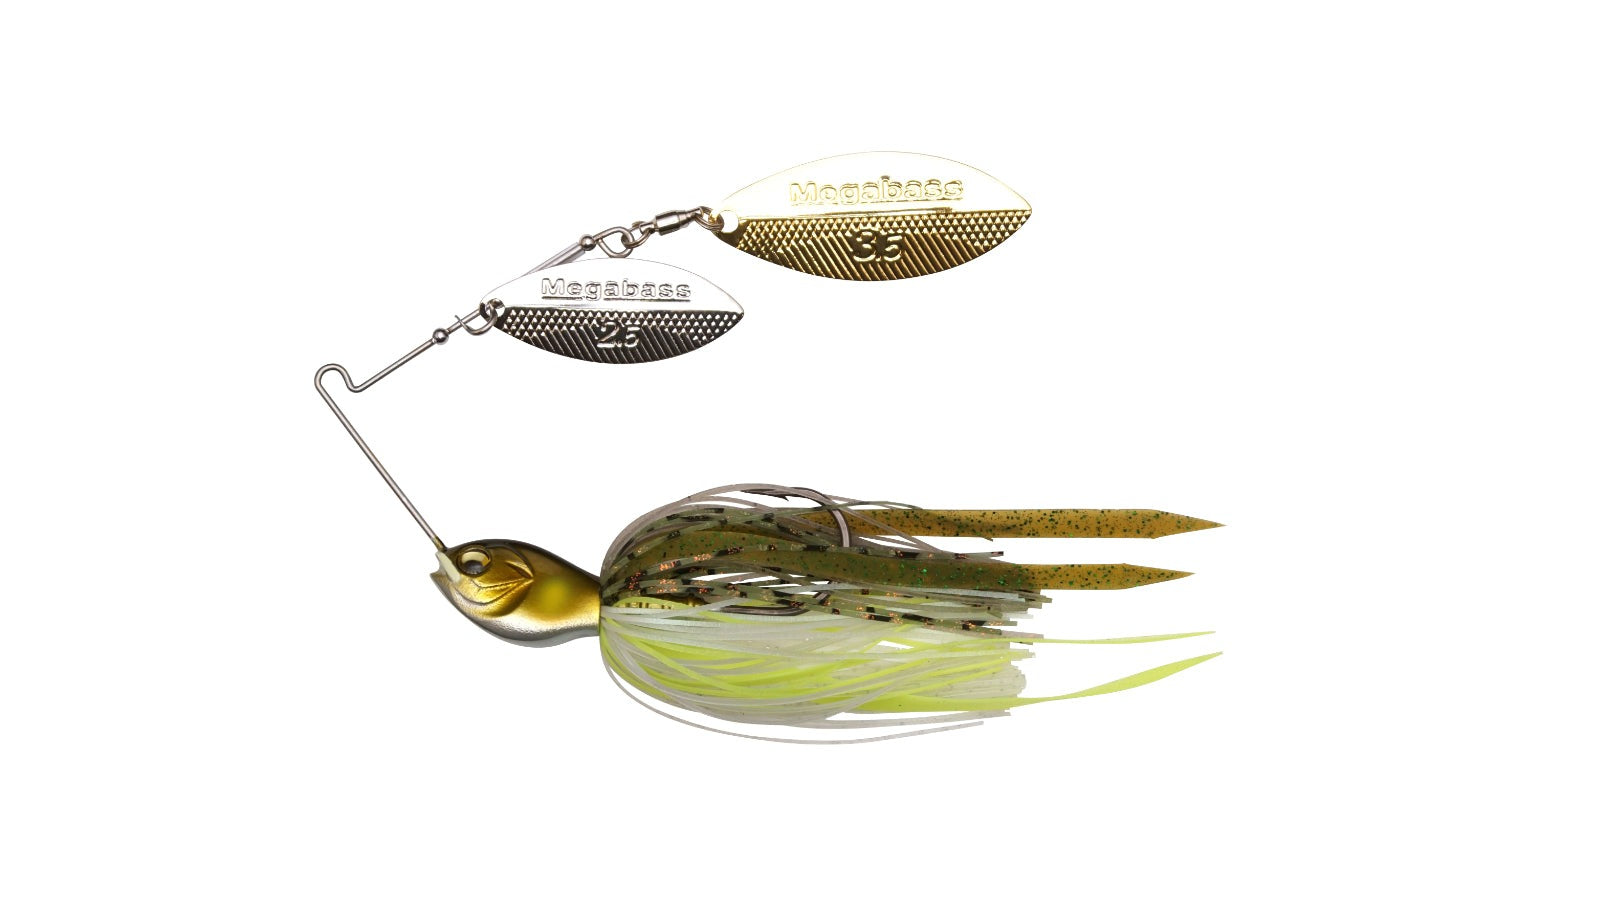 4 New Premium Fishing Tackle Spin/Buzz Spinnerbaits, 3/8oz. Great Colors #2